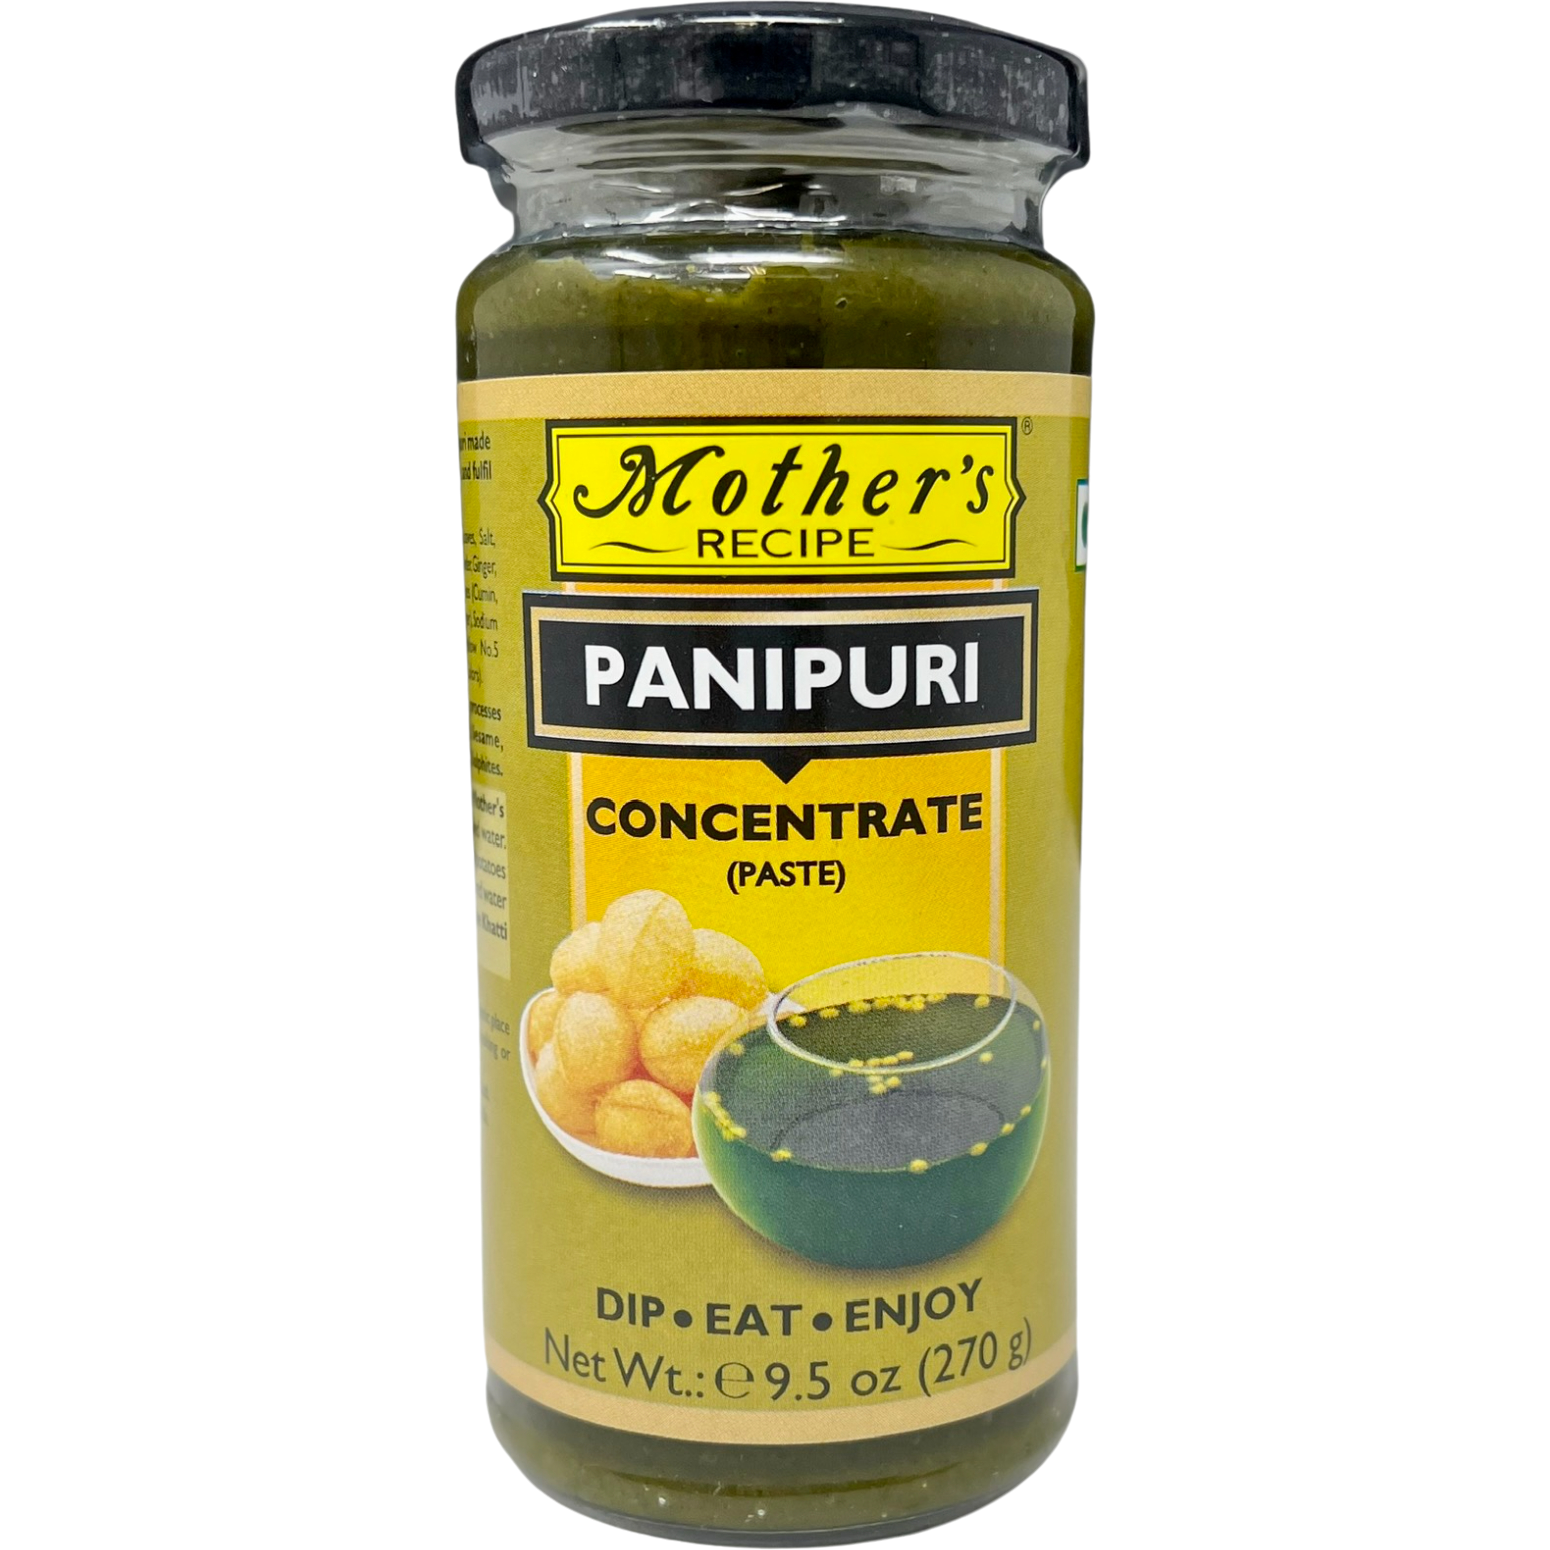 Pack of 2 - Mother's Recipe Panipuri Concentrate - 270 Gm (9.5 Oz)